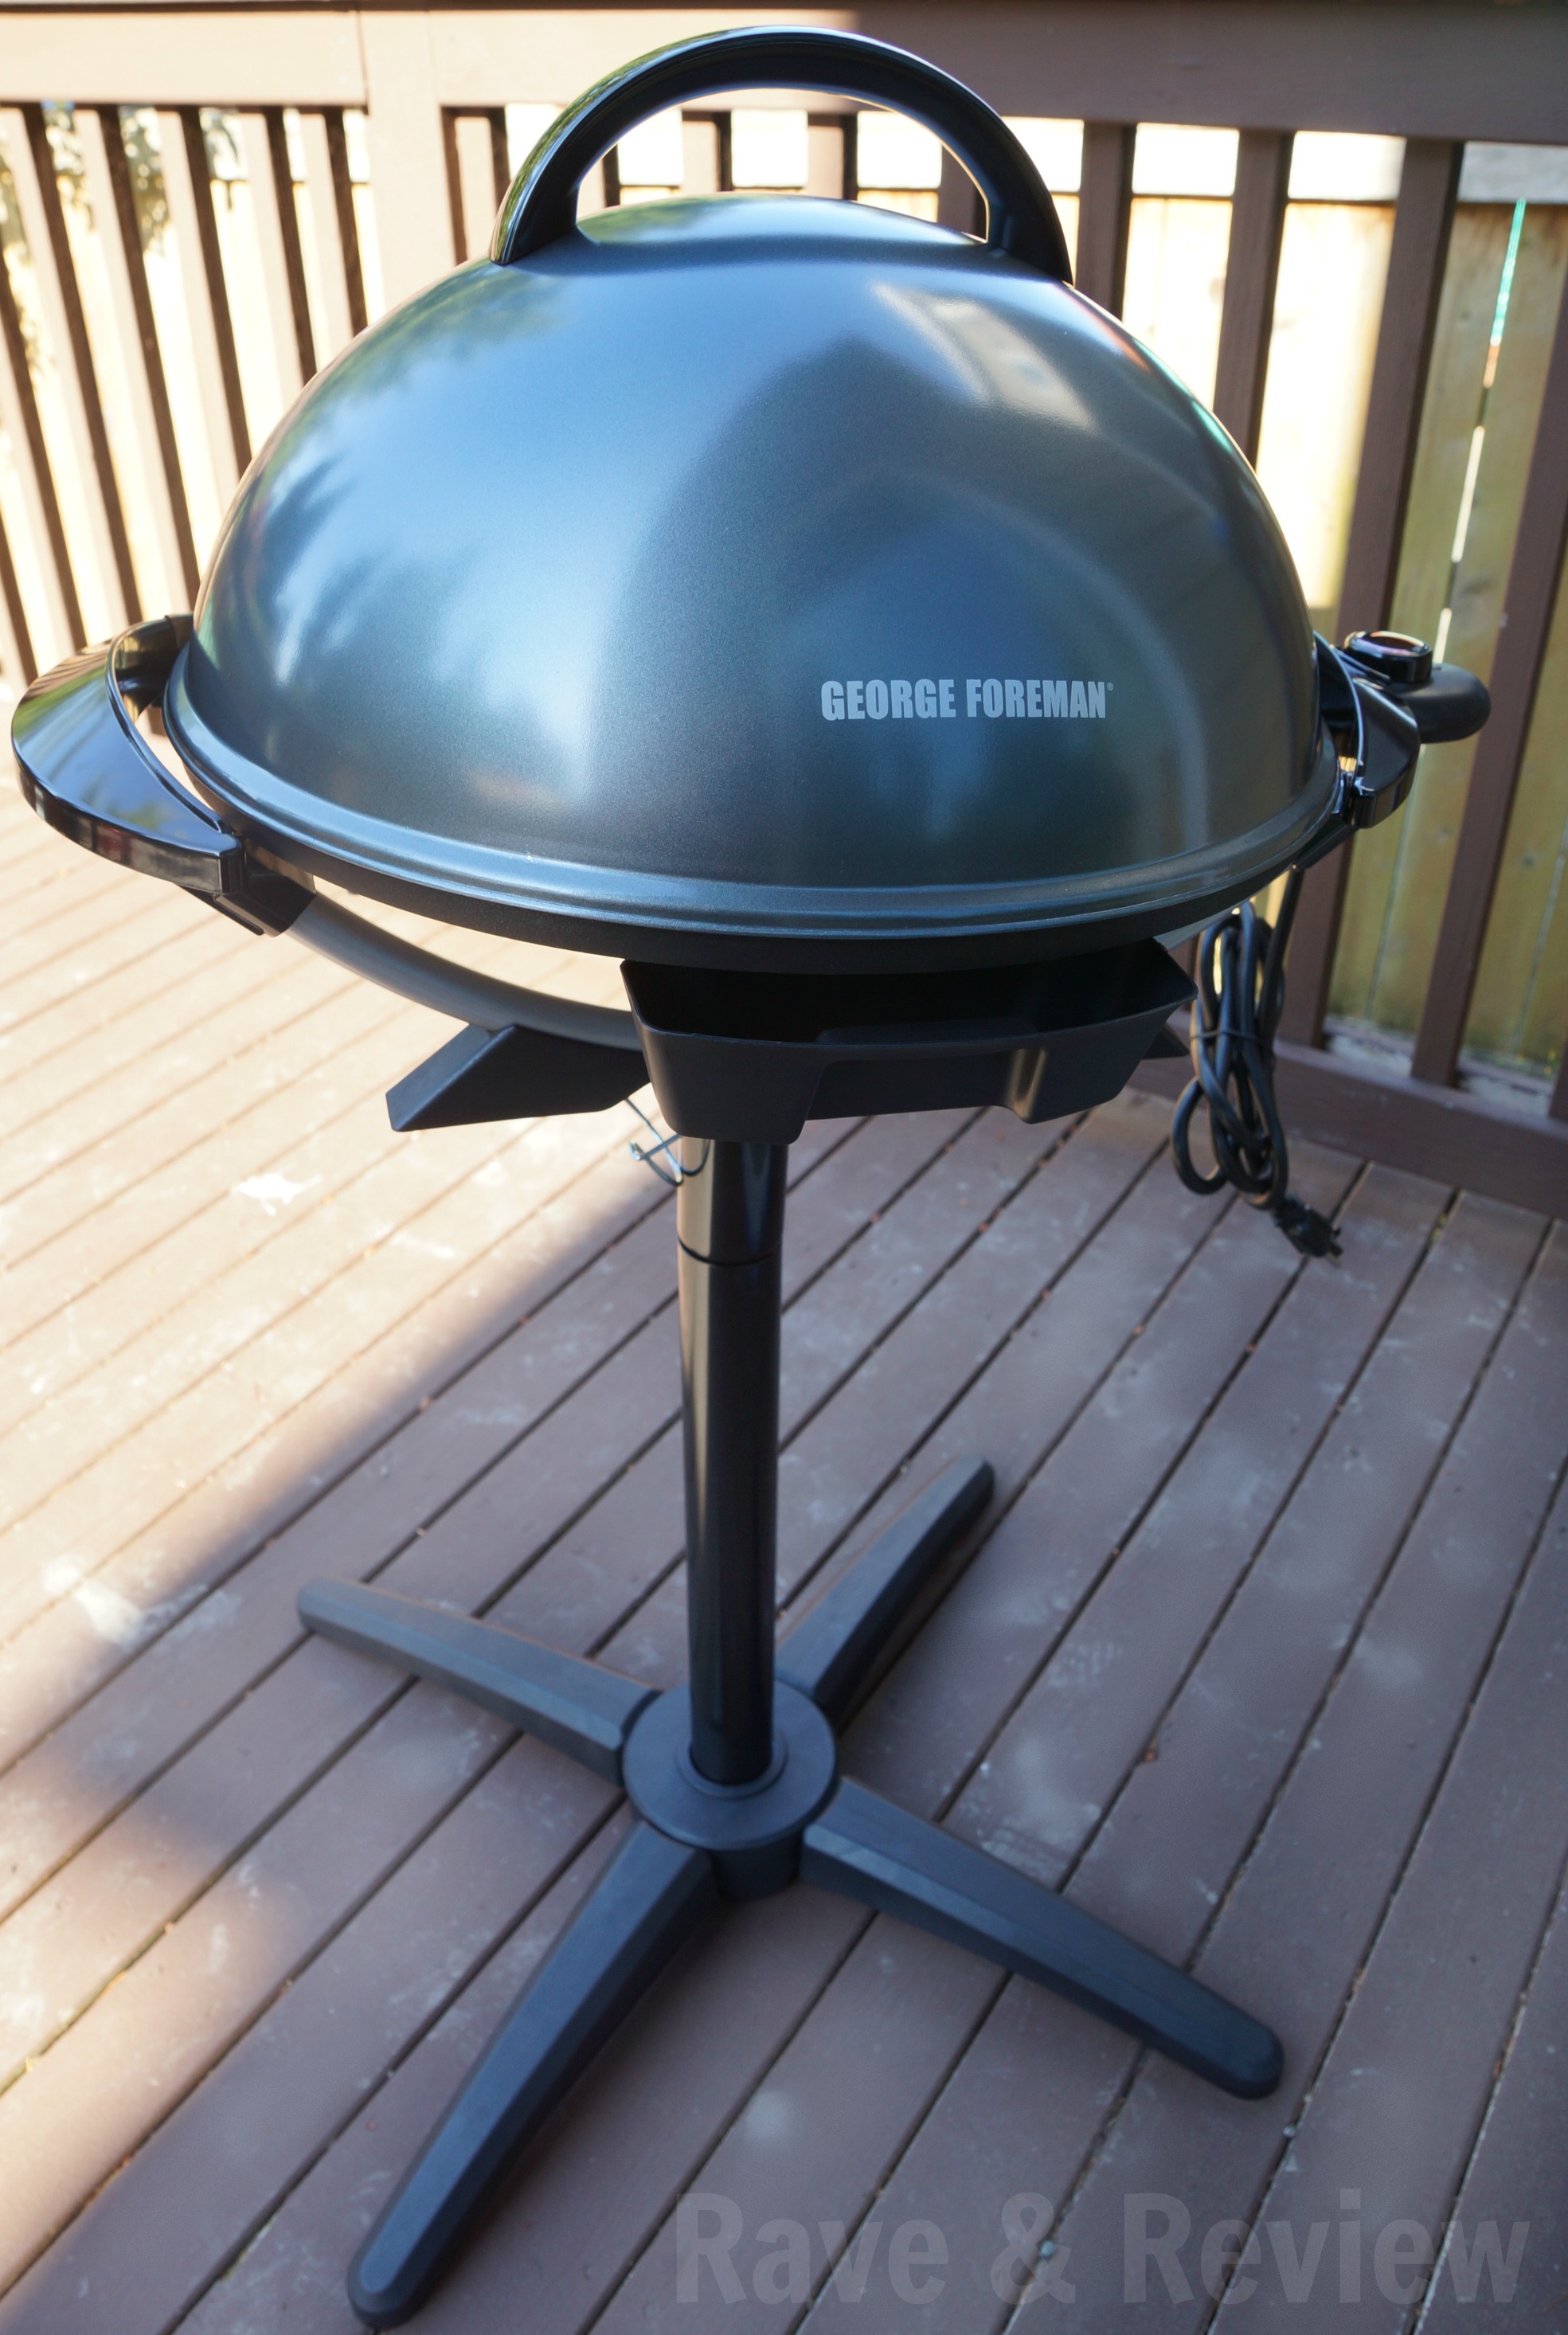 Suradam forhindre Original Make BBQ season last all year with 2-in-1 healthy grilling indoors or out  from George Foreman - Rave & Review